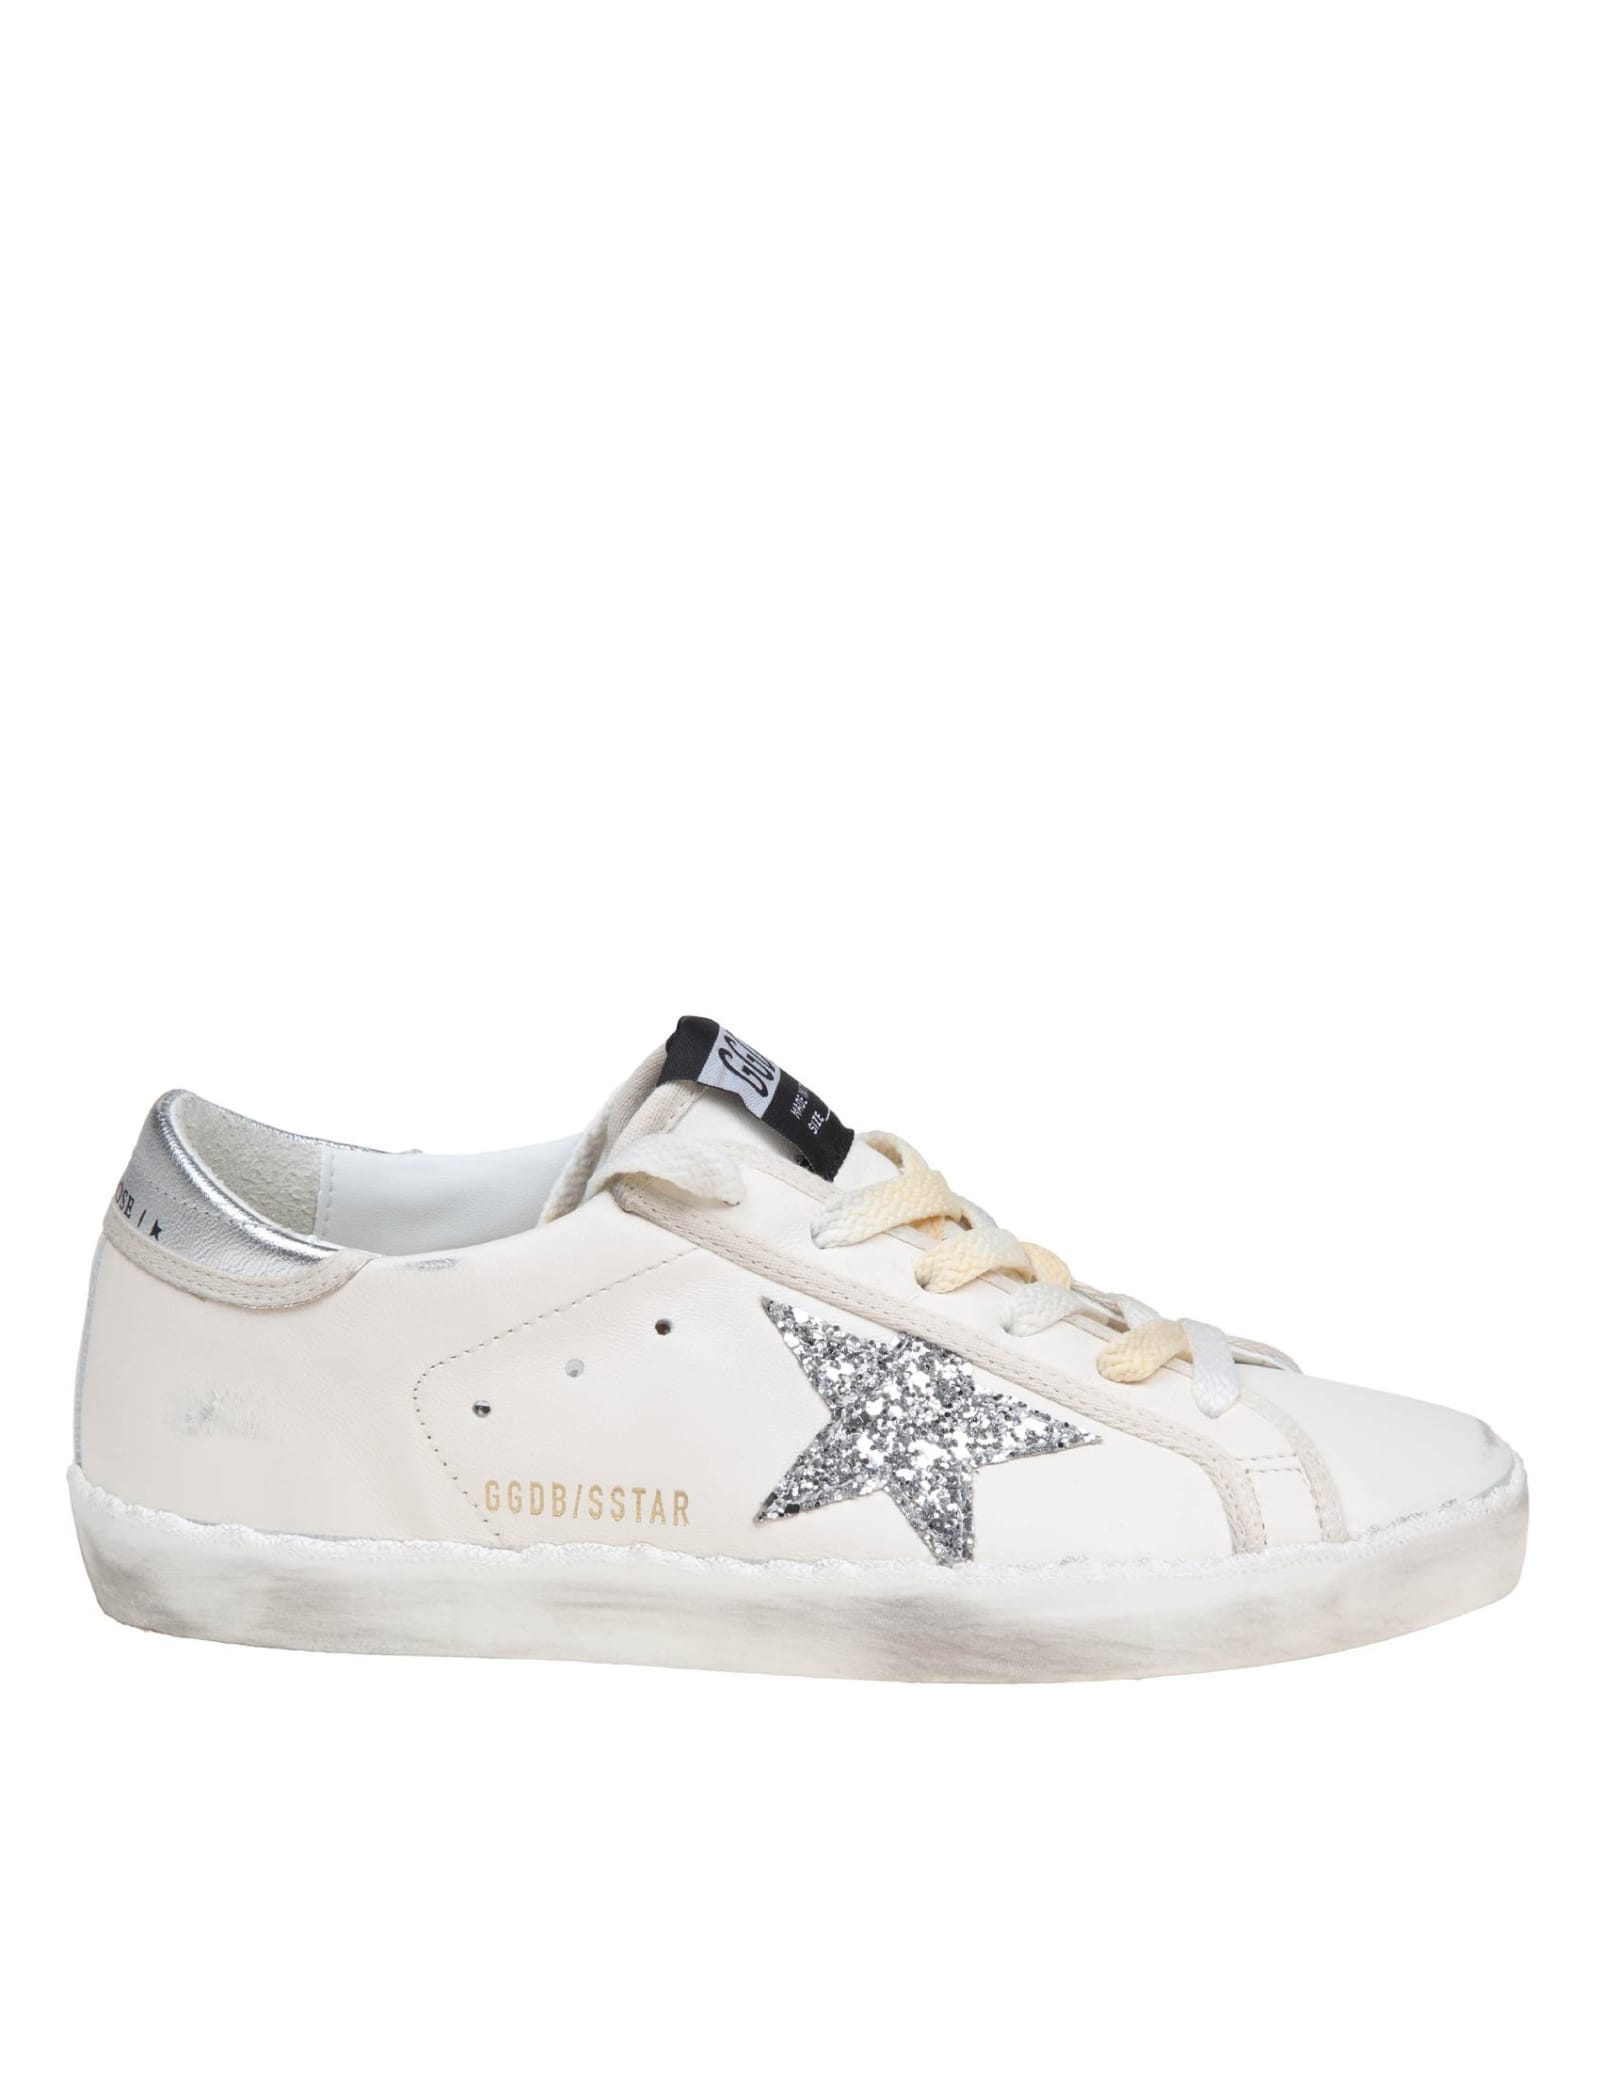 GOLDEN GOOSE GOLDEN GOOSE SUPER-STAR LEATHER SNEAKERS WITH SILVER GLITTER STAR